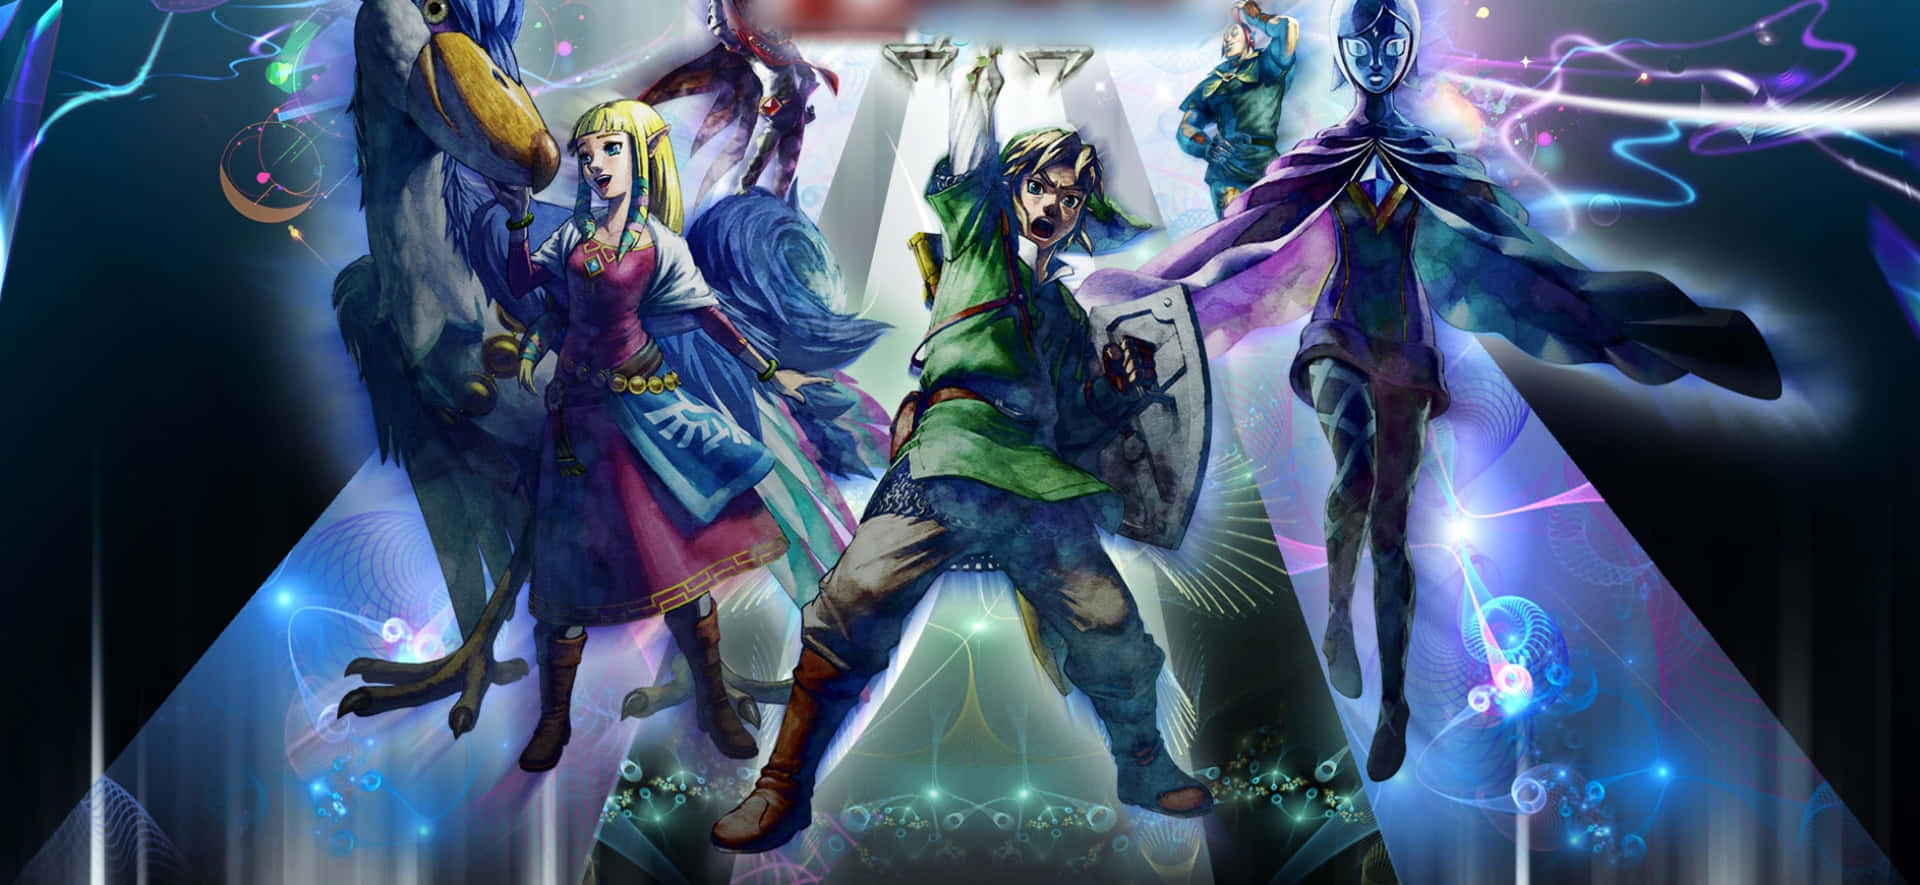 The Legend of Zelda Characters in a Group Illustration Wallpaper